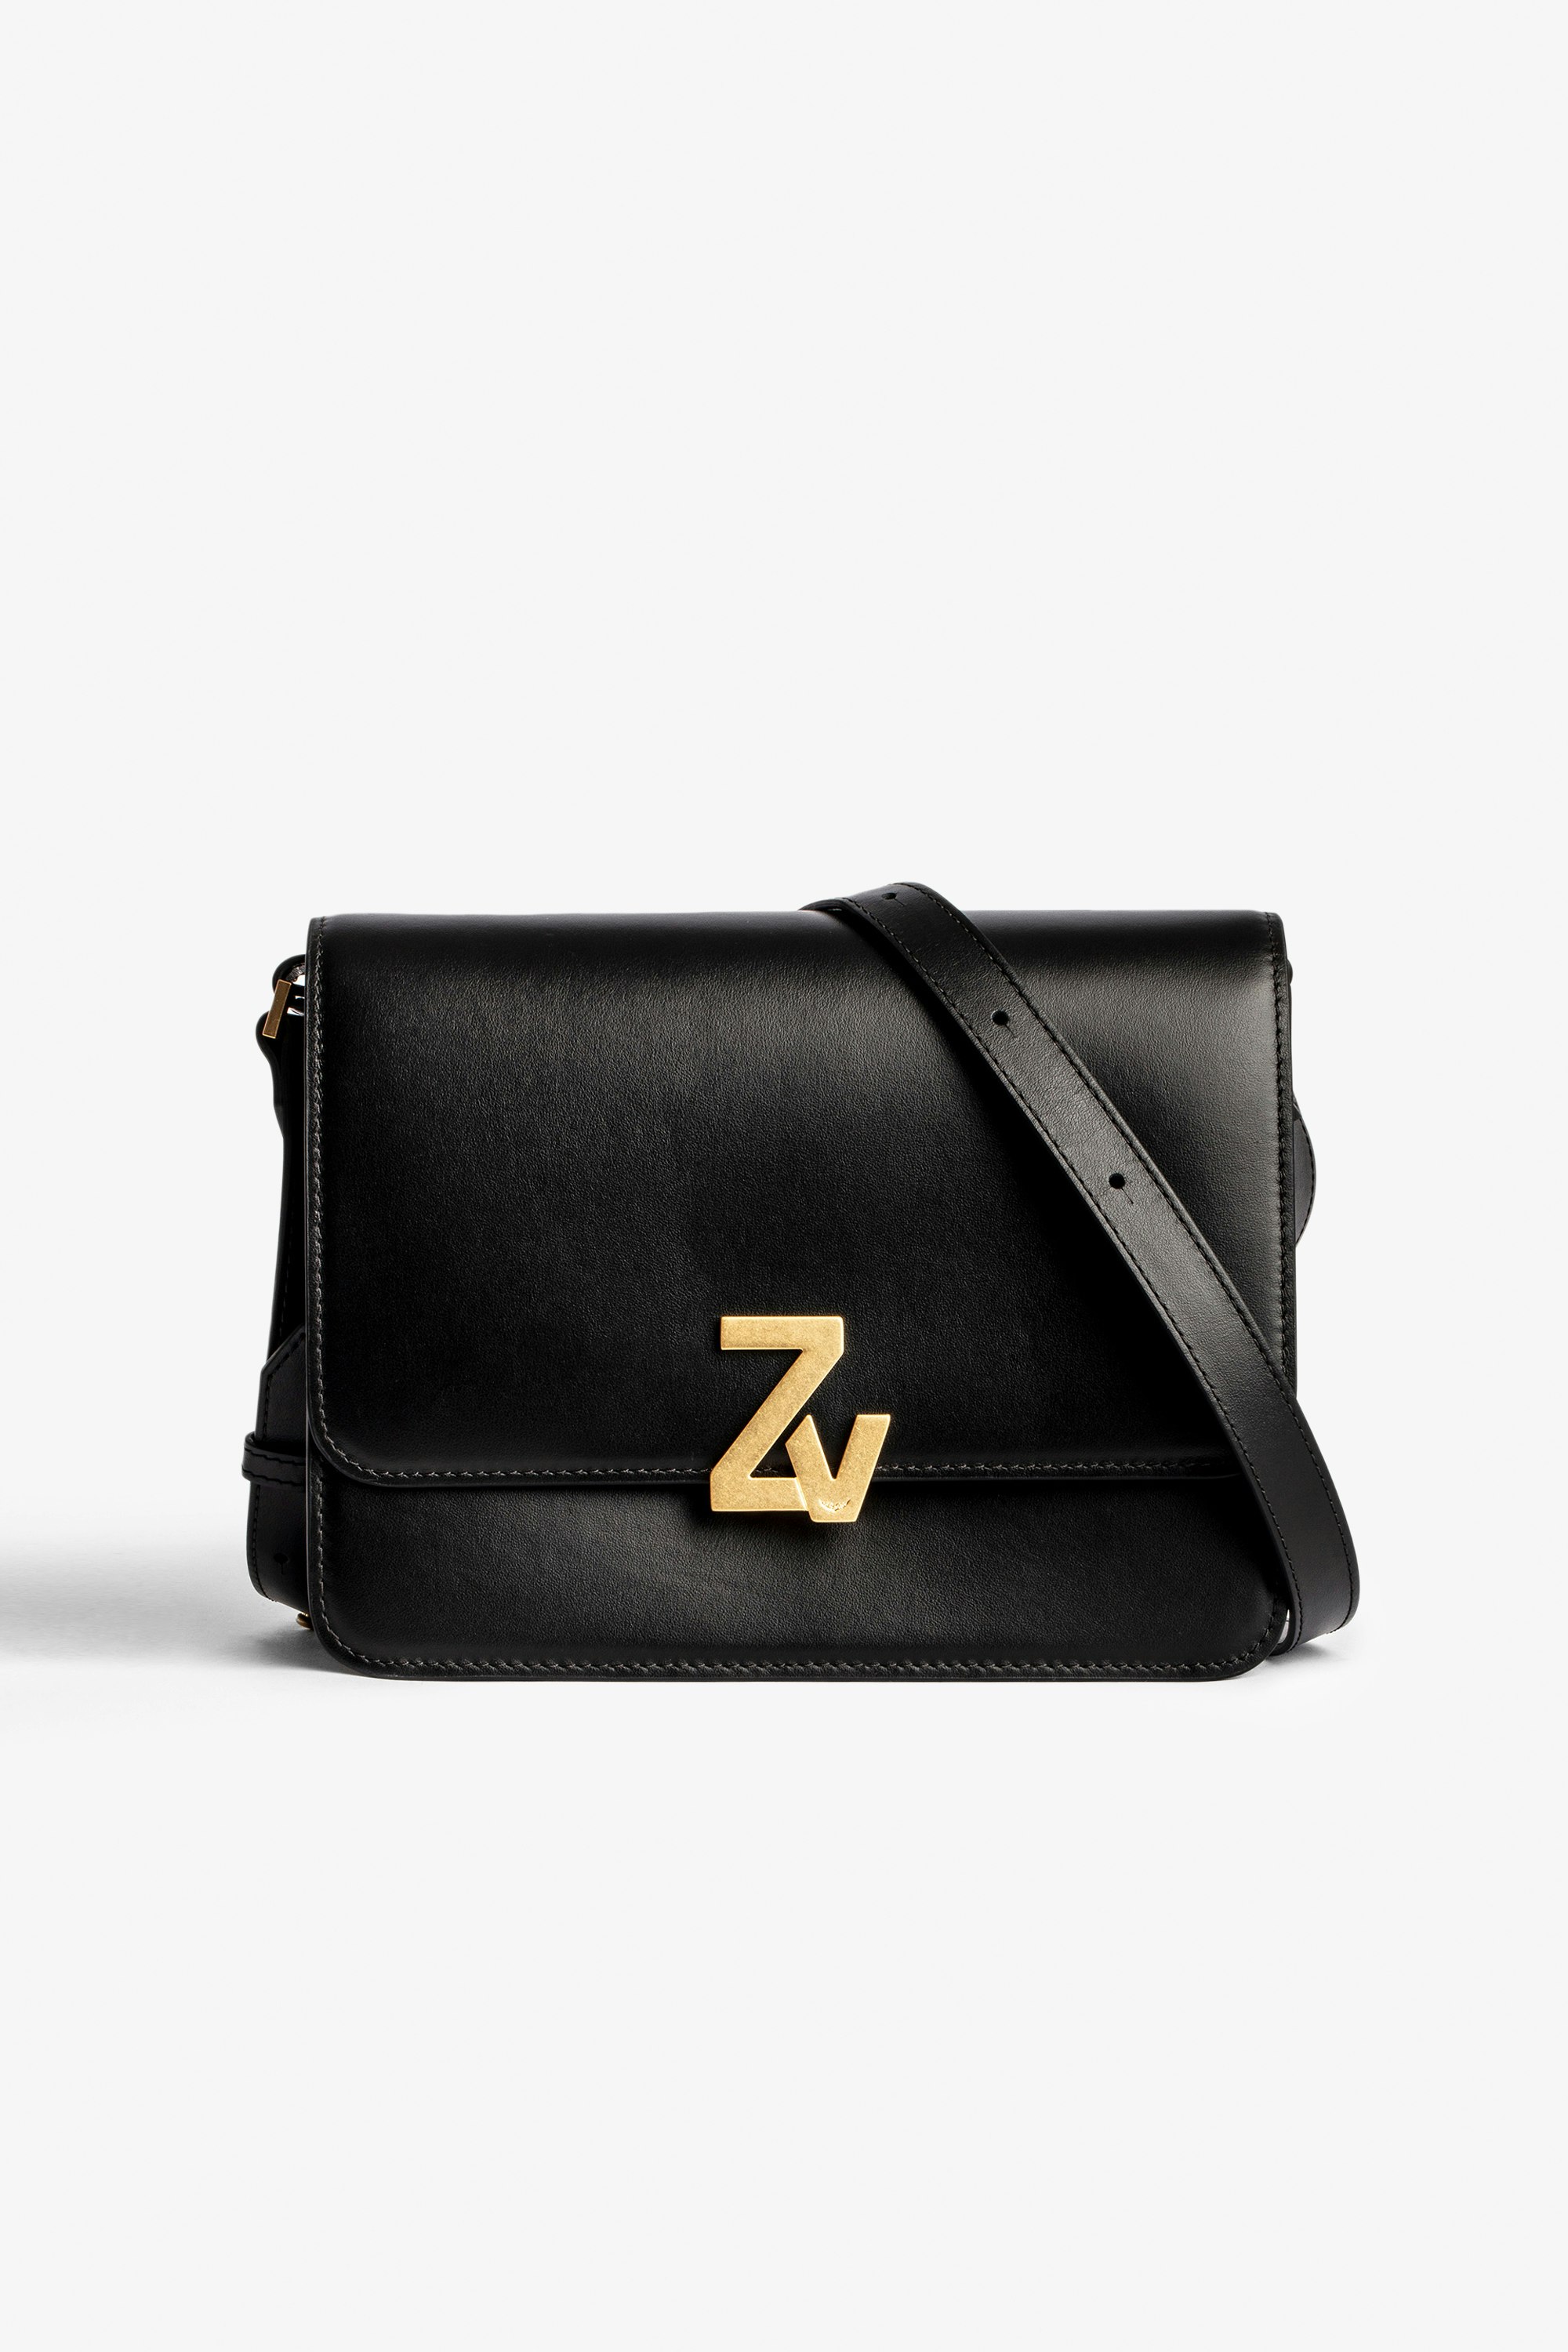 Tasche ZV Initiale Le City undefined